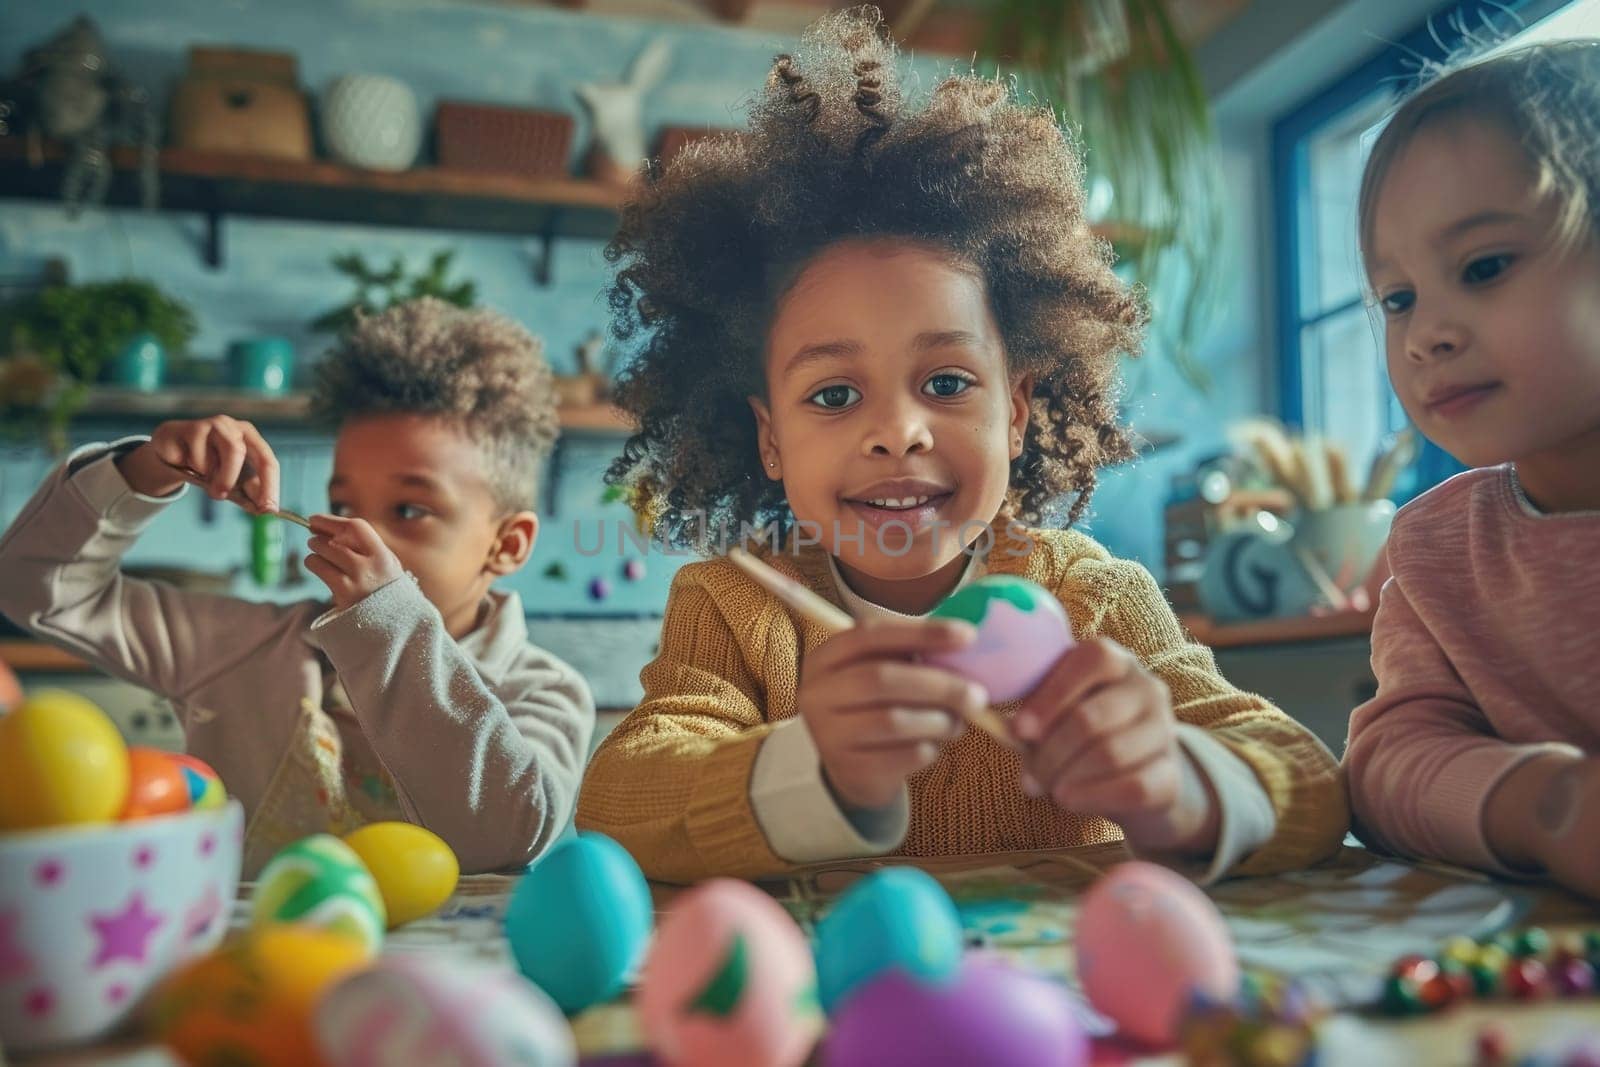 children painting Easter eggs at a crafting table